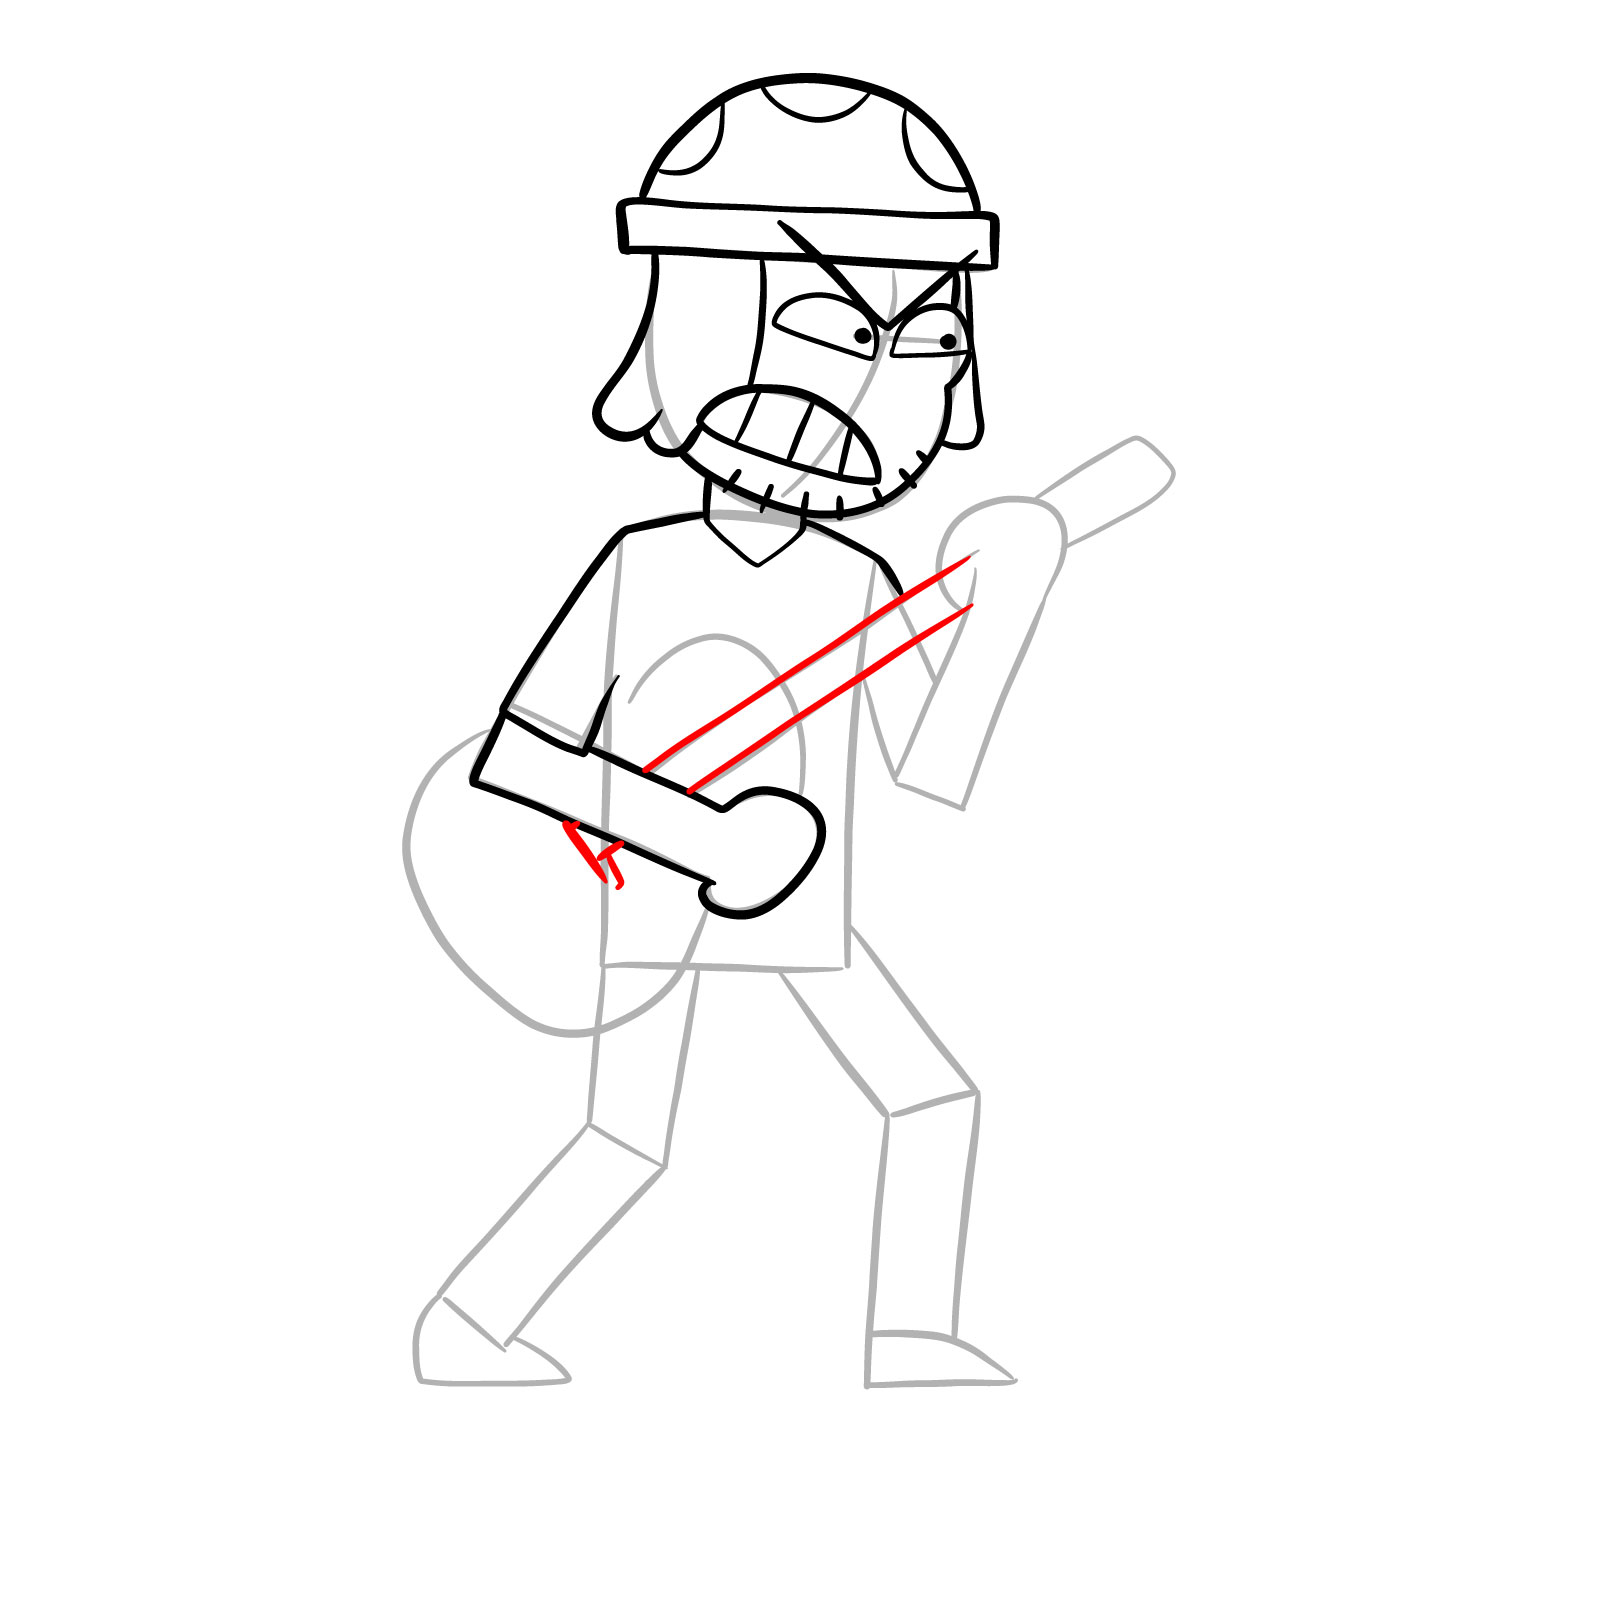 How to draw Suction Cup Man with a guitar - step 14